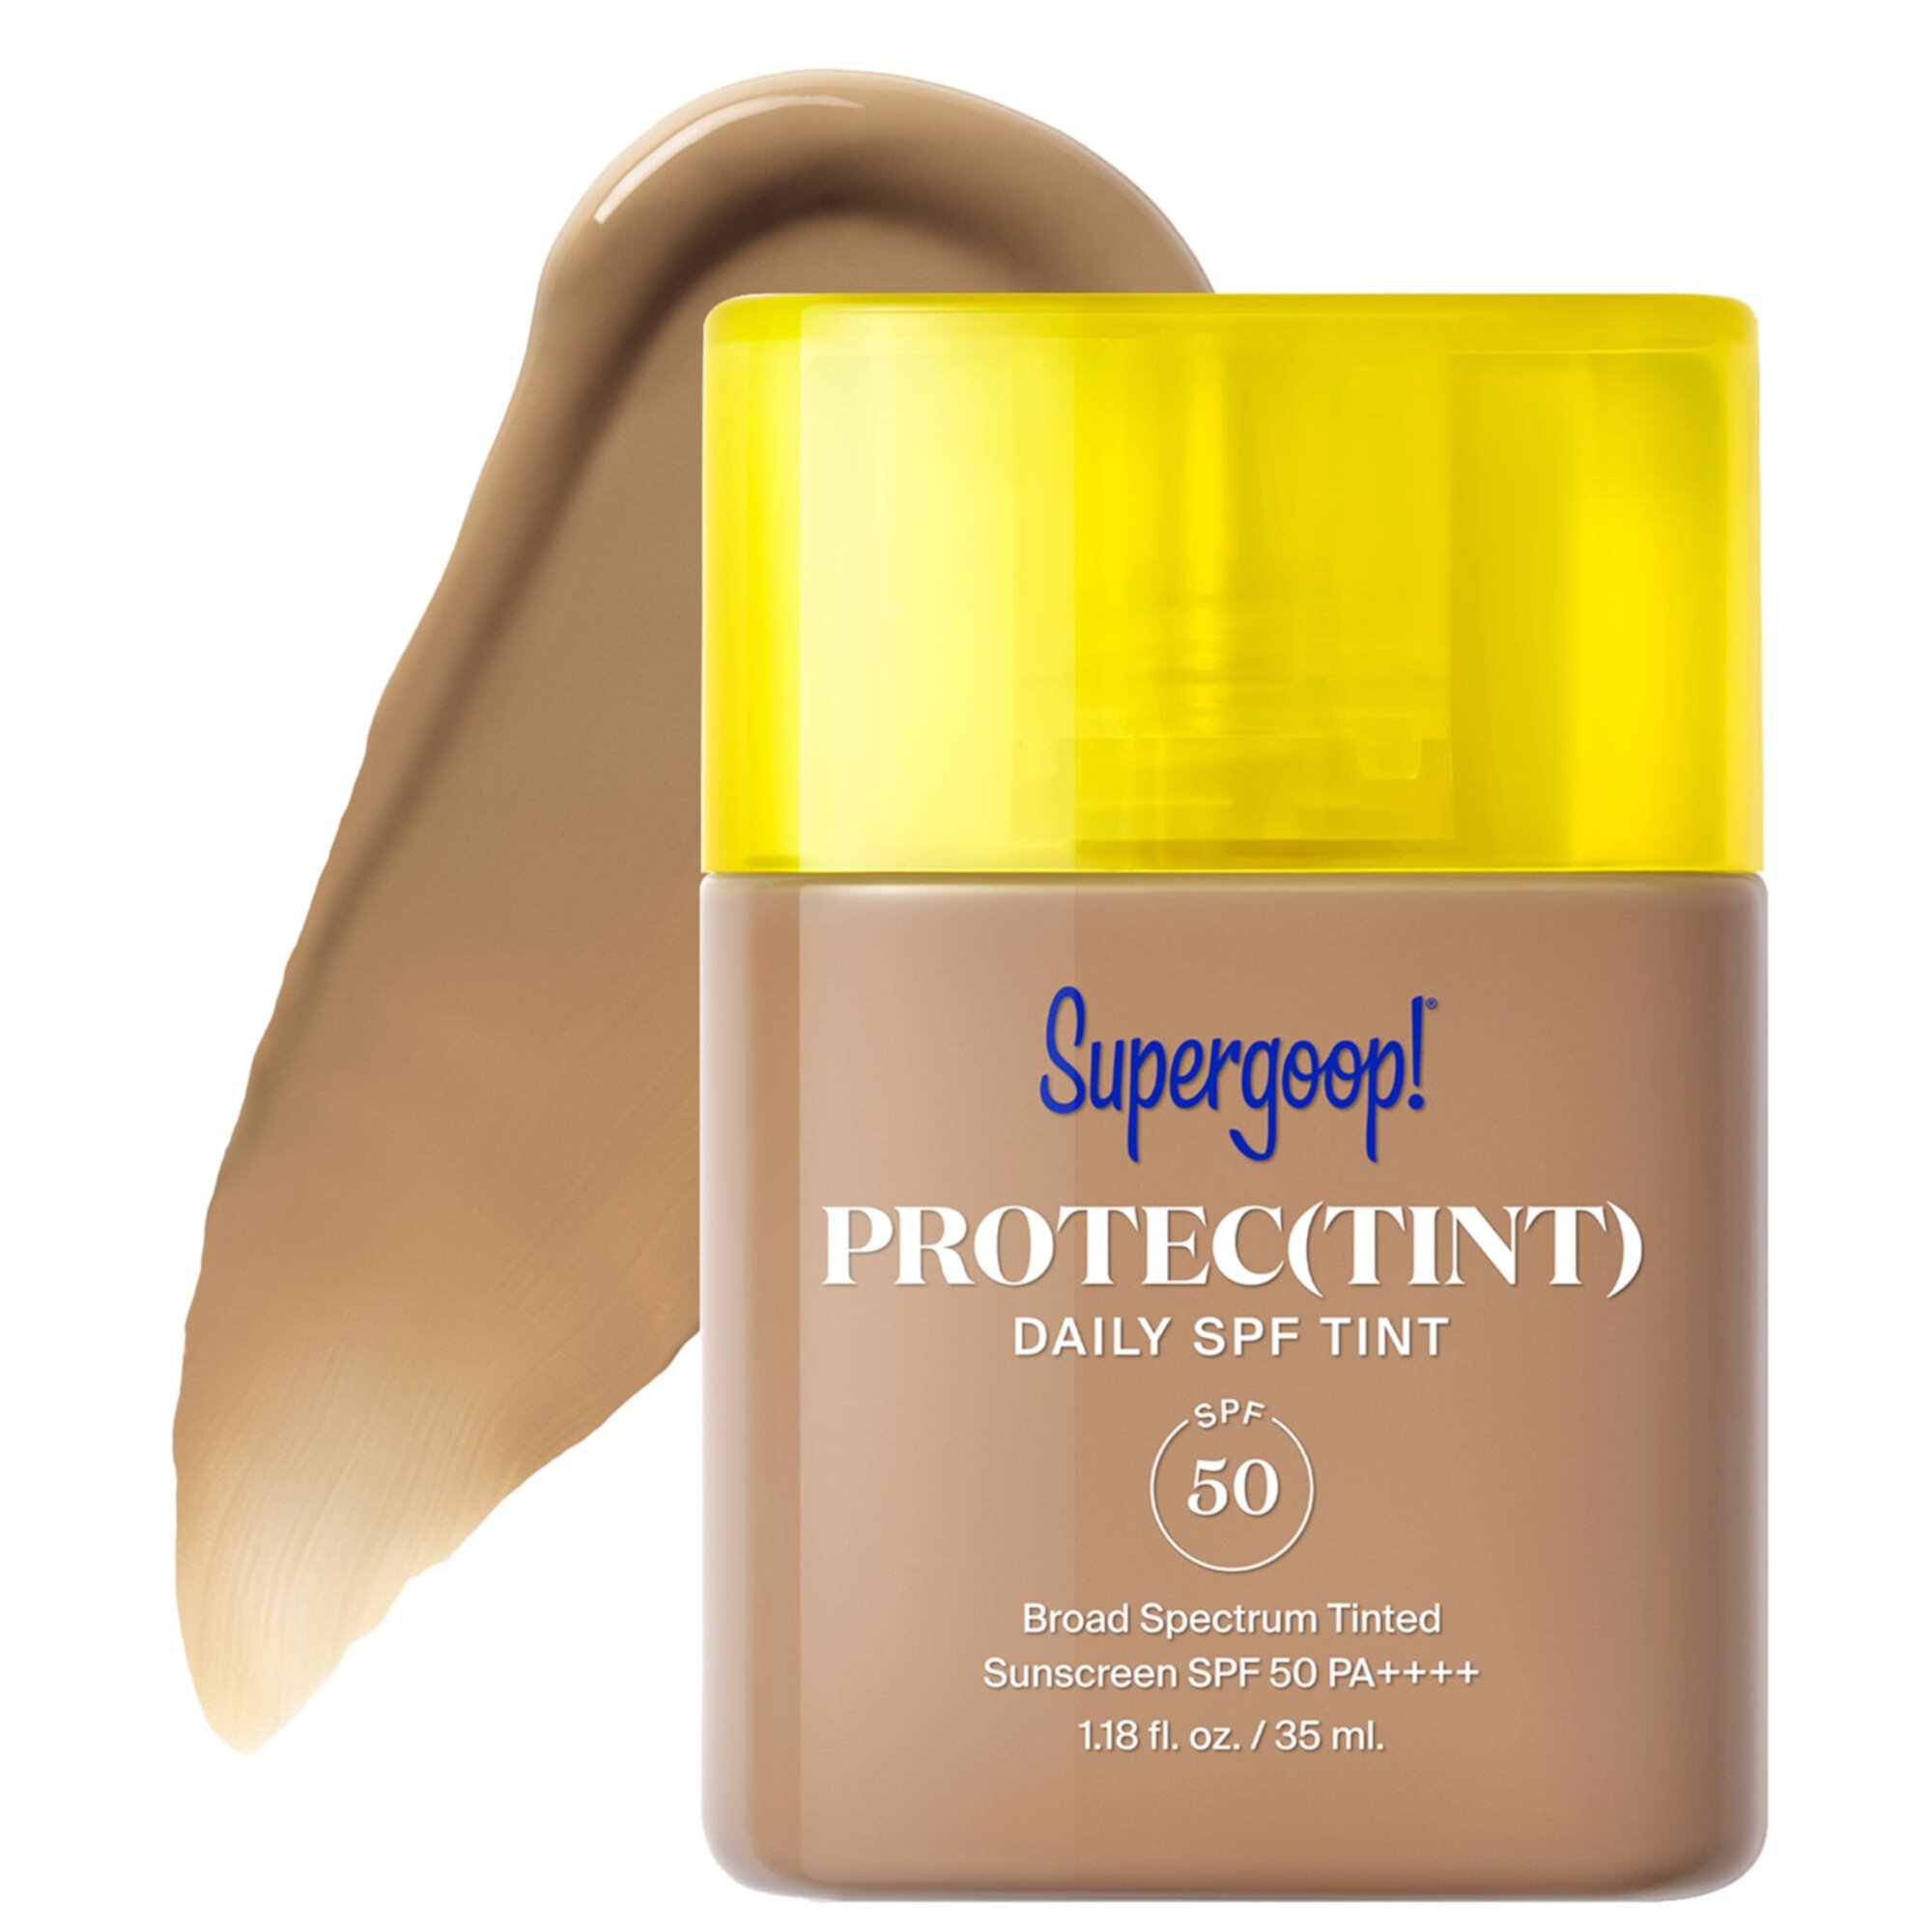 Protec(tint) Daily SPF Tint SPF 50 Sunscreen Skin Tint with Ectoin Supergoop!